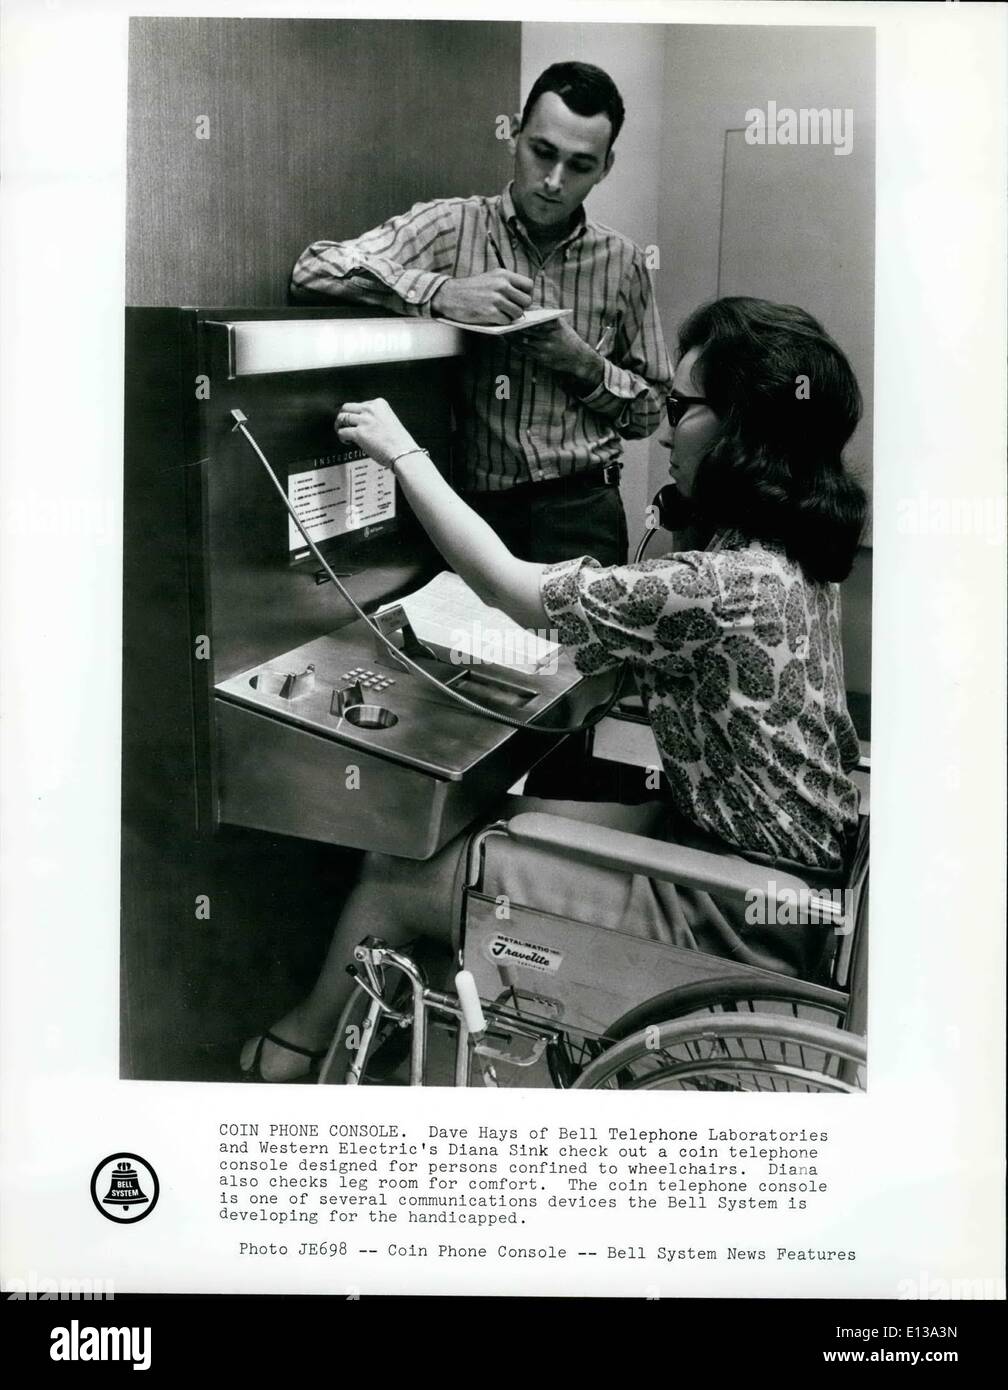 Feb. 29, 2012 - Coin Phone Console: Dave Hays of Bell Telephone Laboratories and Western Electric's Diana Sink check out a coin Stock Photo